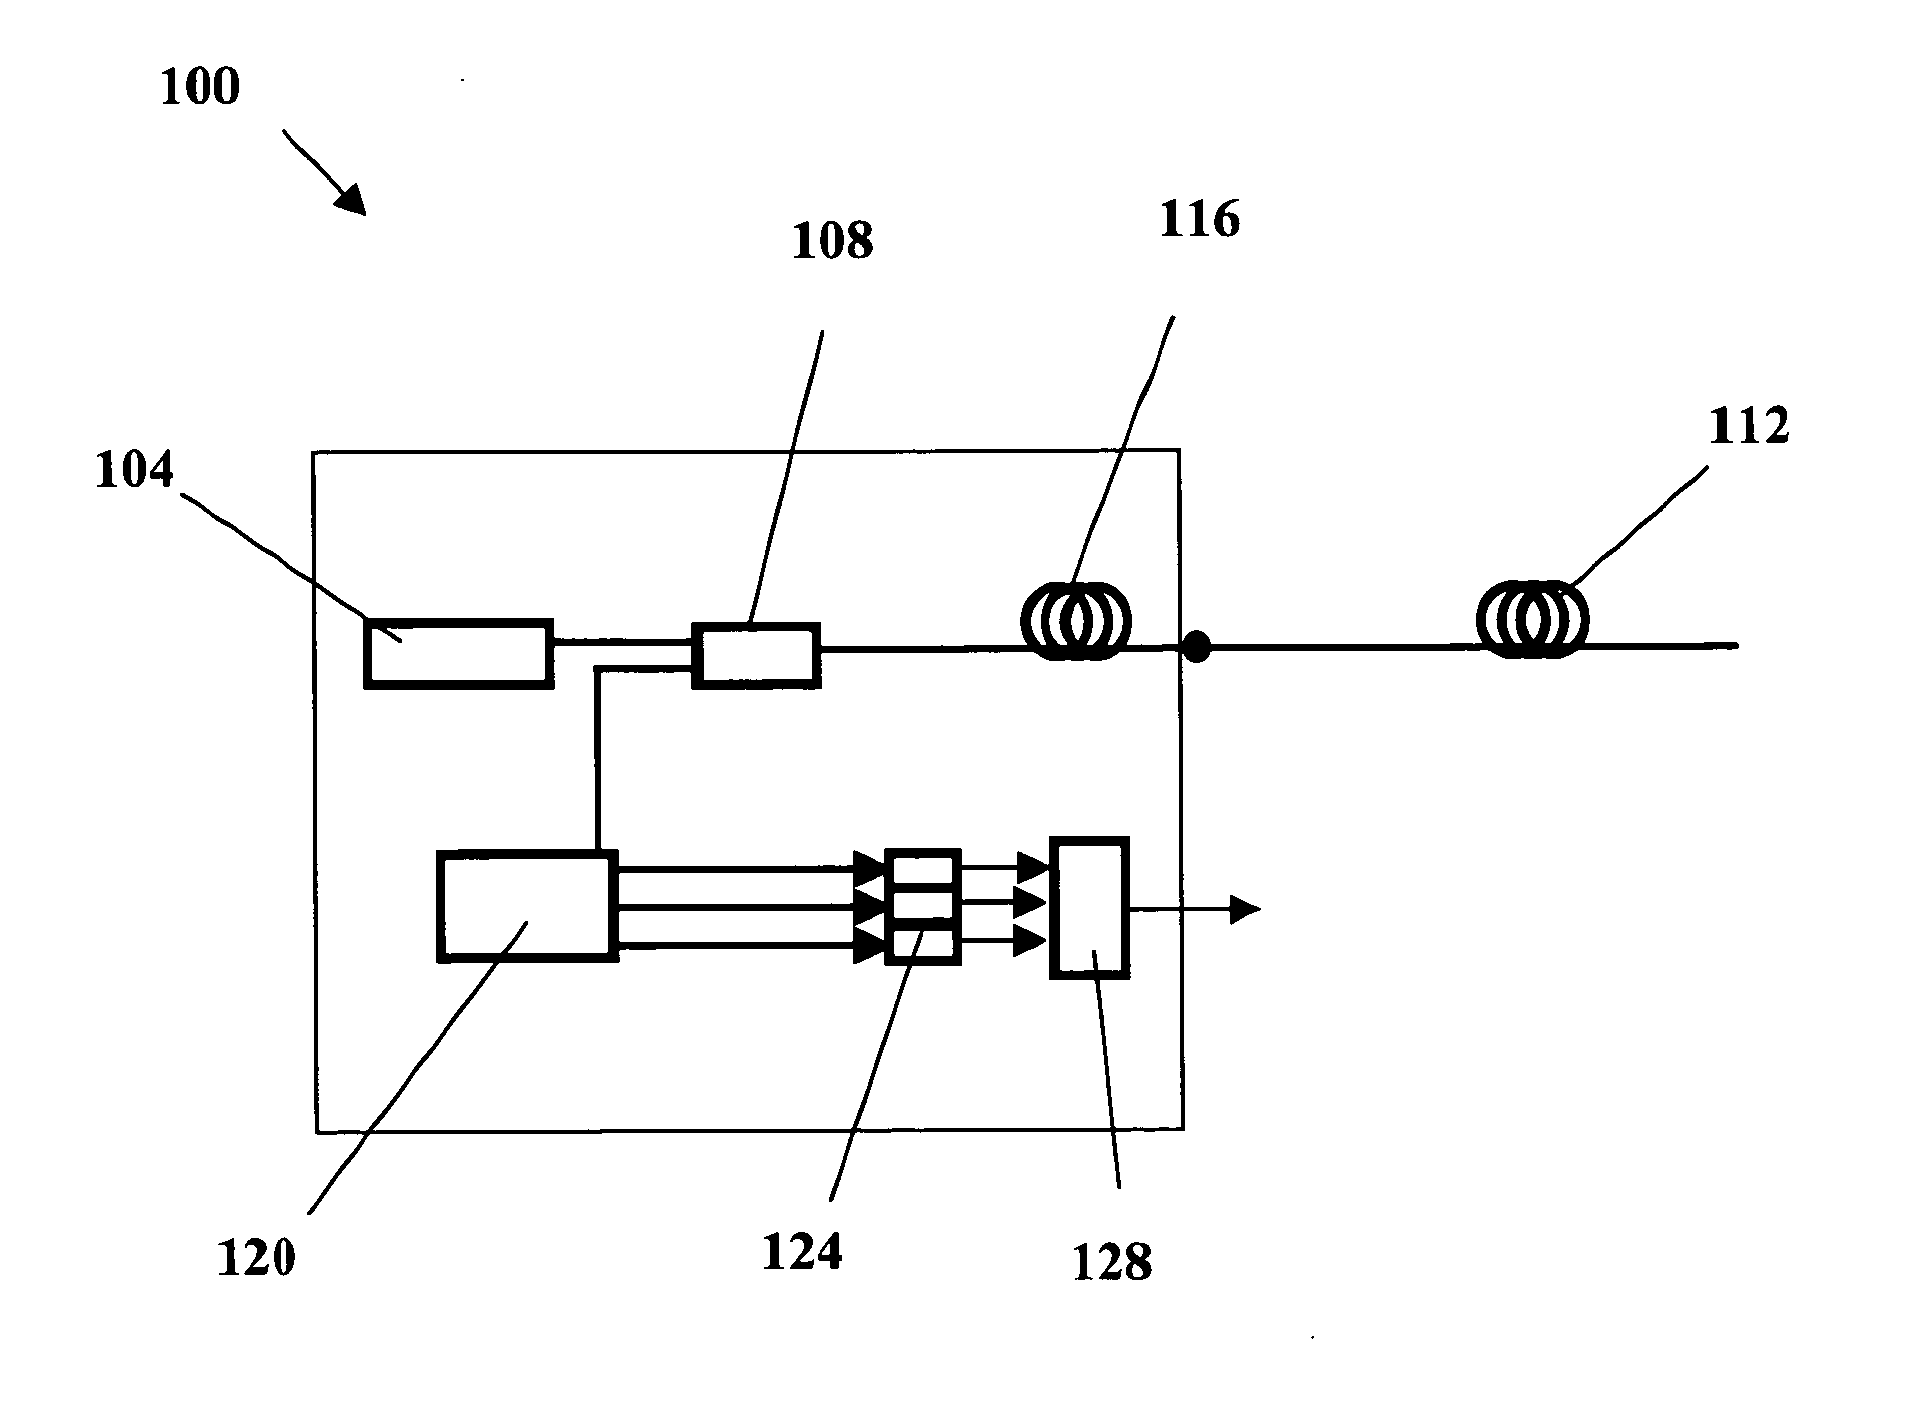 Auto-correcting or self-calibrating DTS temperature sensing systems and methods